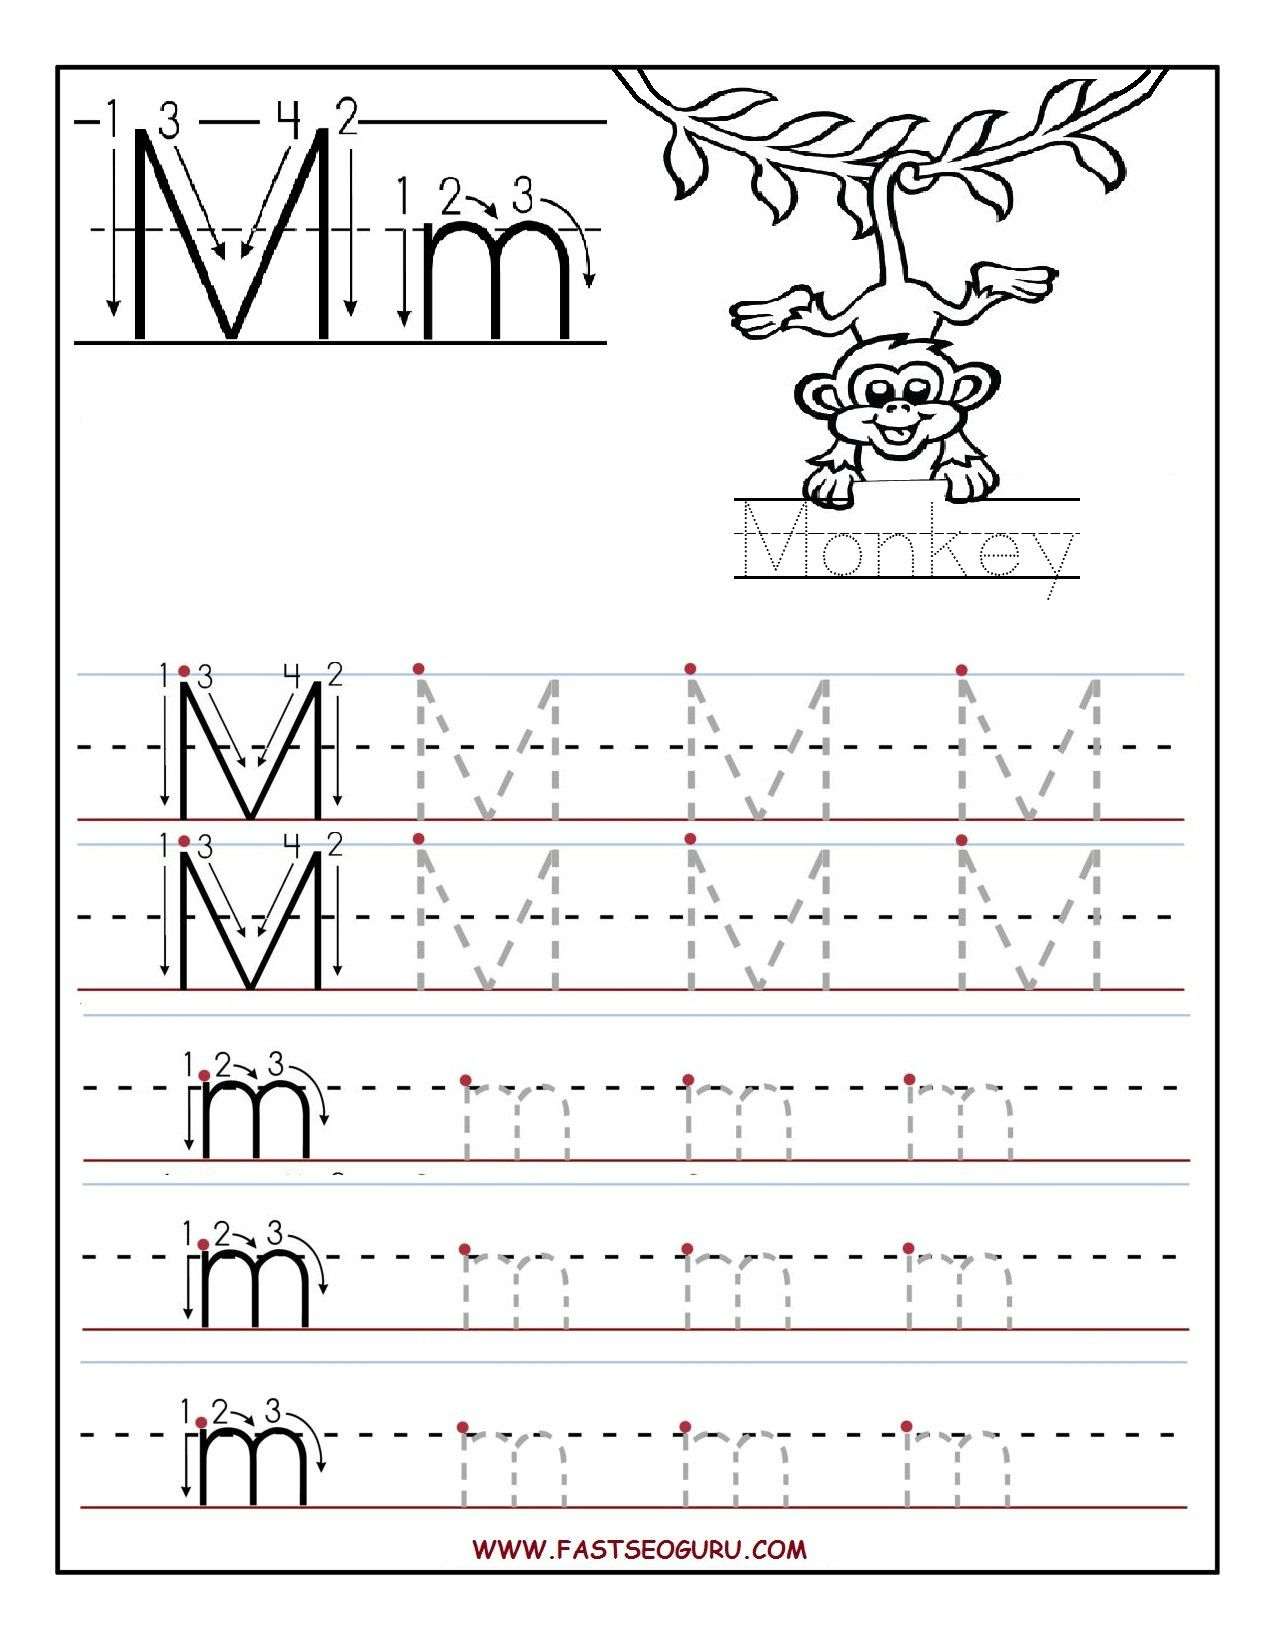 Printable Letter M Tracing Worksheets For Preschool inside Letter M Worksheets For First Grade